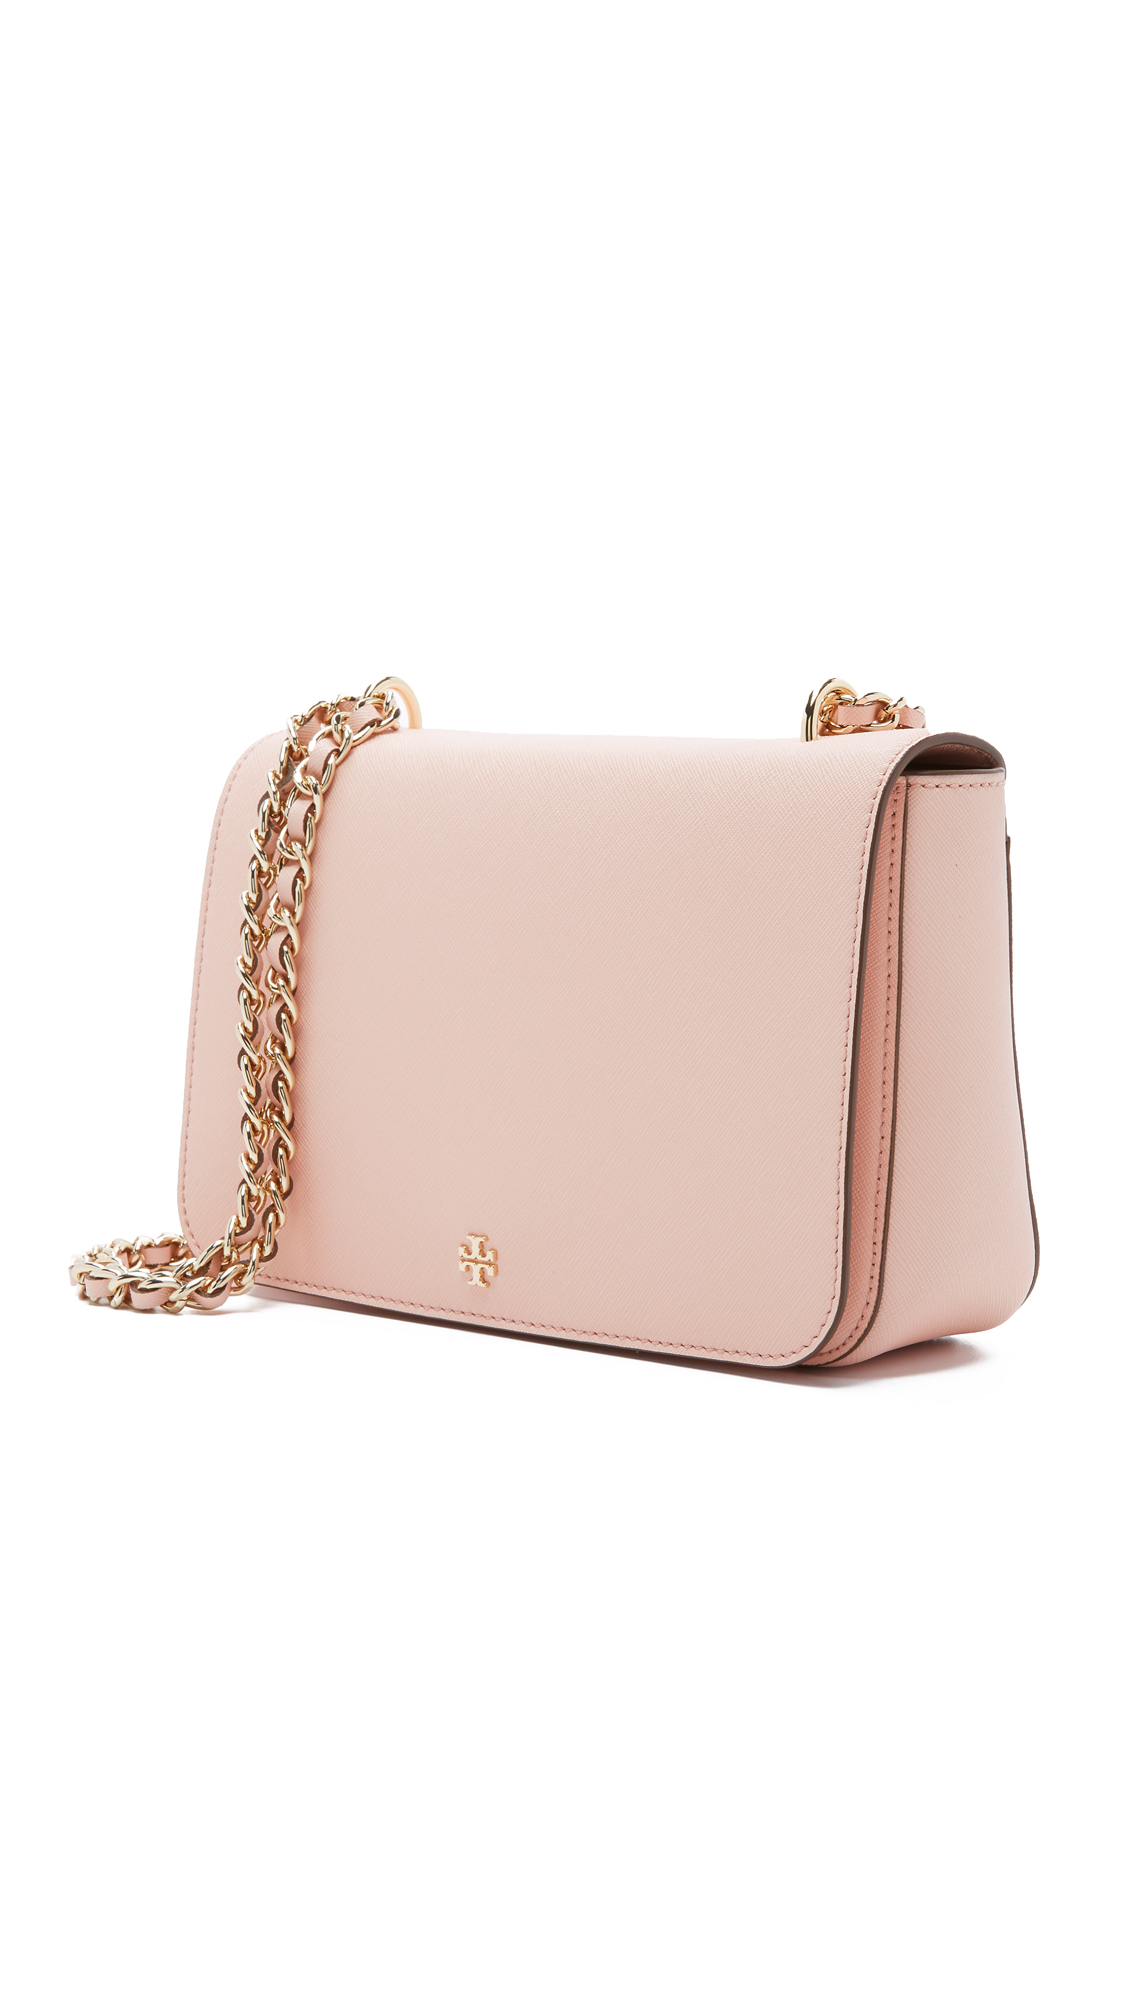 Lyst - Tory Burch Robinson Cross Body Bag - Pale Apricot in Pink